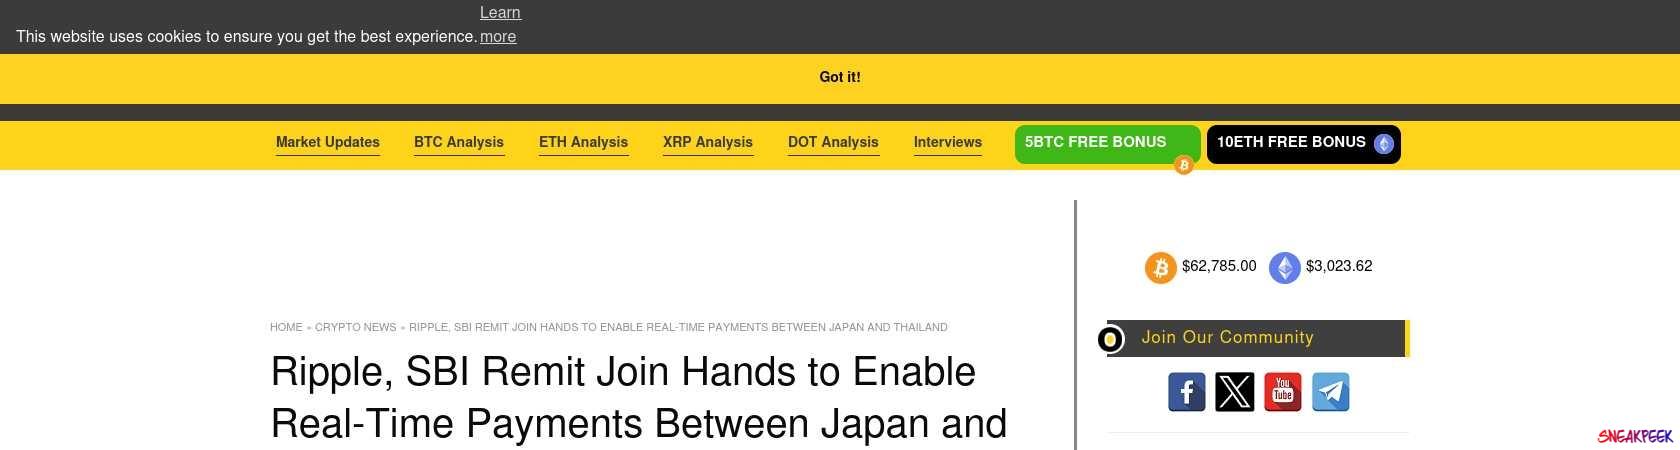 Read the full Article:  ⭲ Ripple, SBI Remit Join Hands to Enable Real-Time Payments Between Japan and Thailand  